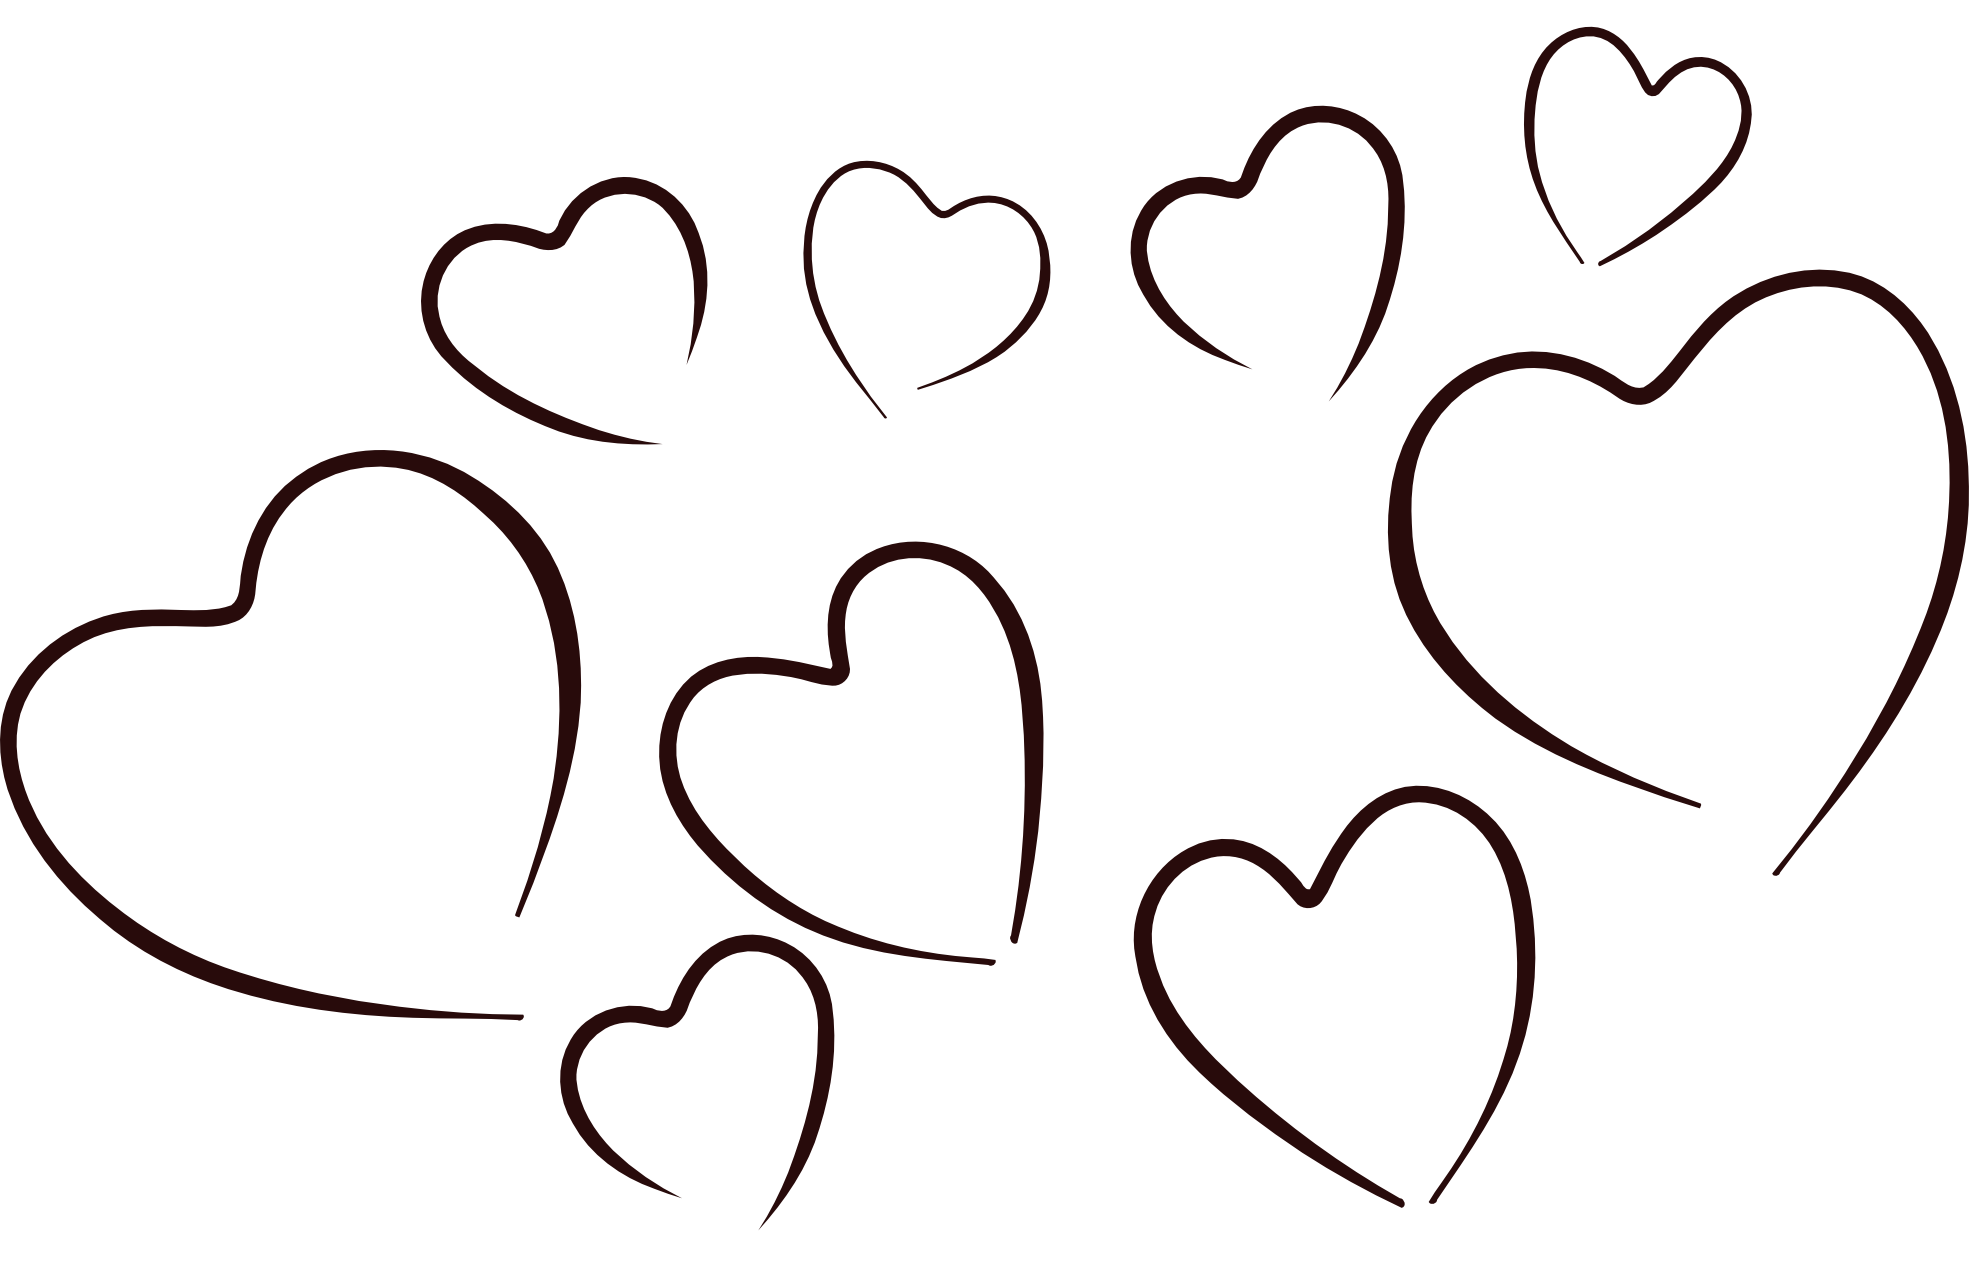 Line Of Hearts Clip Art - ClipArt Best